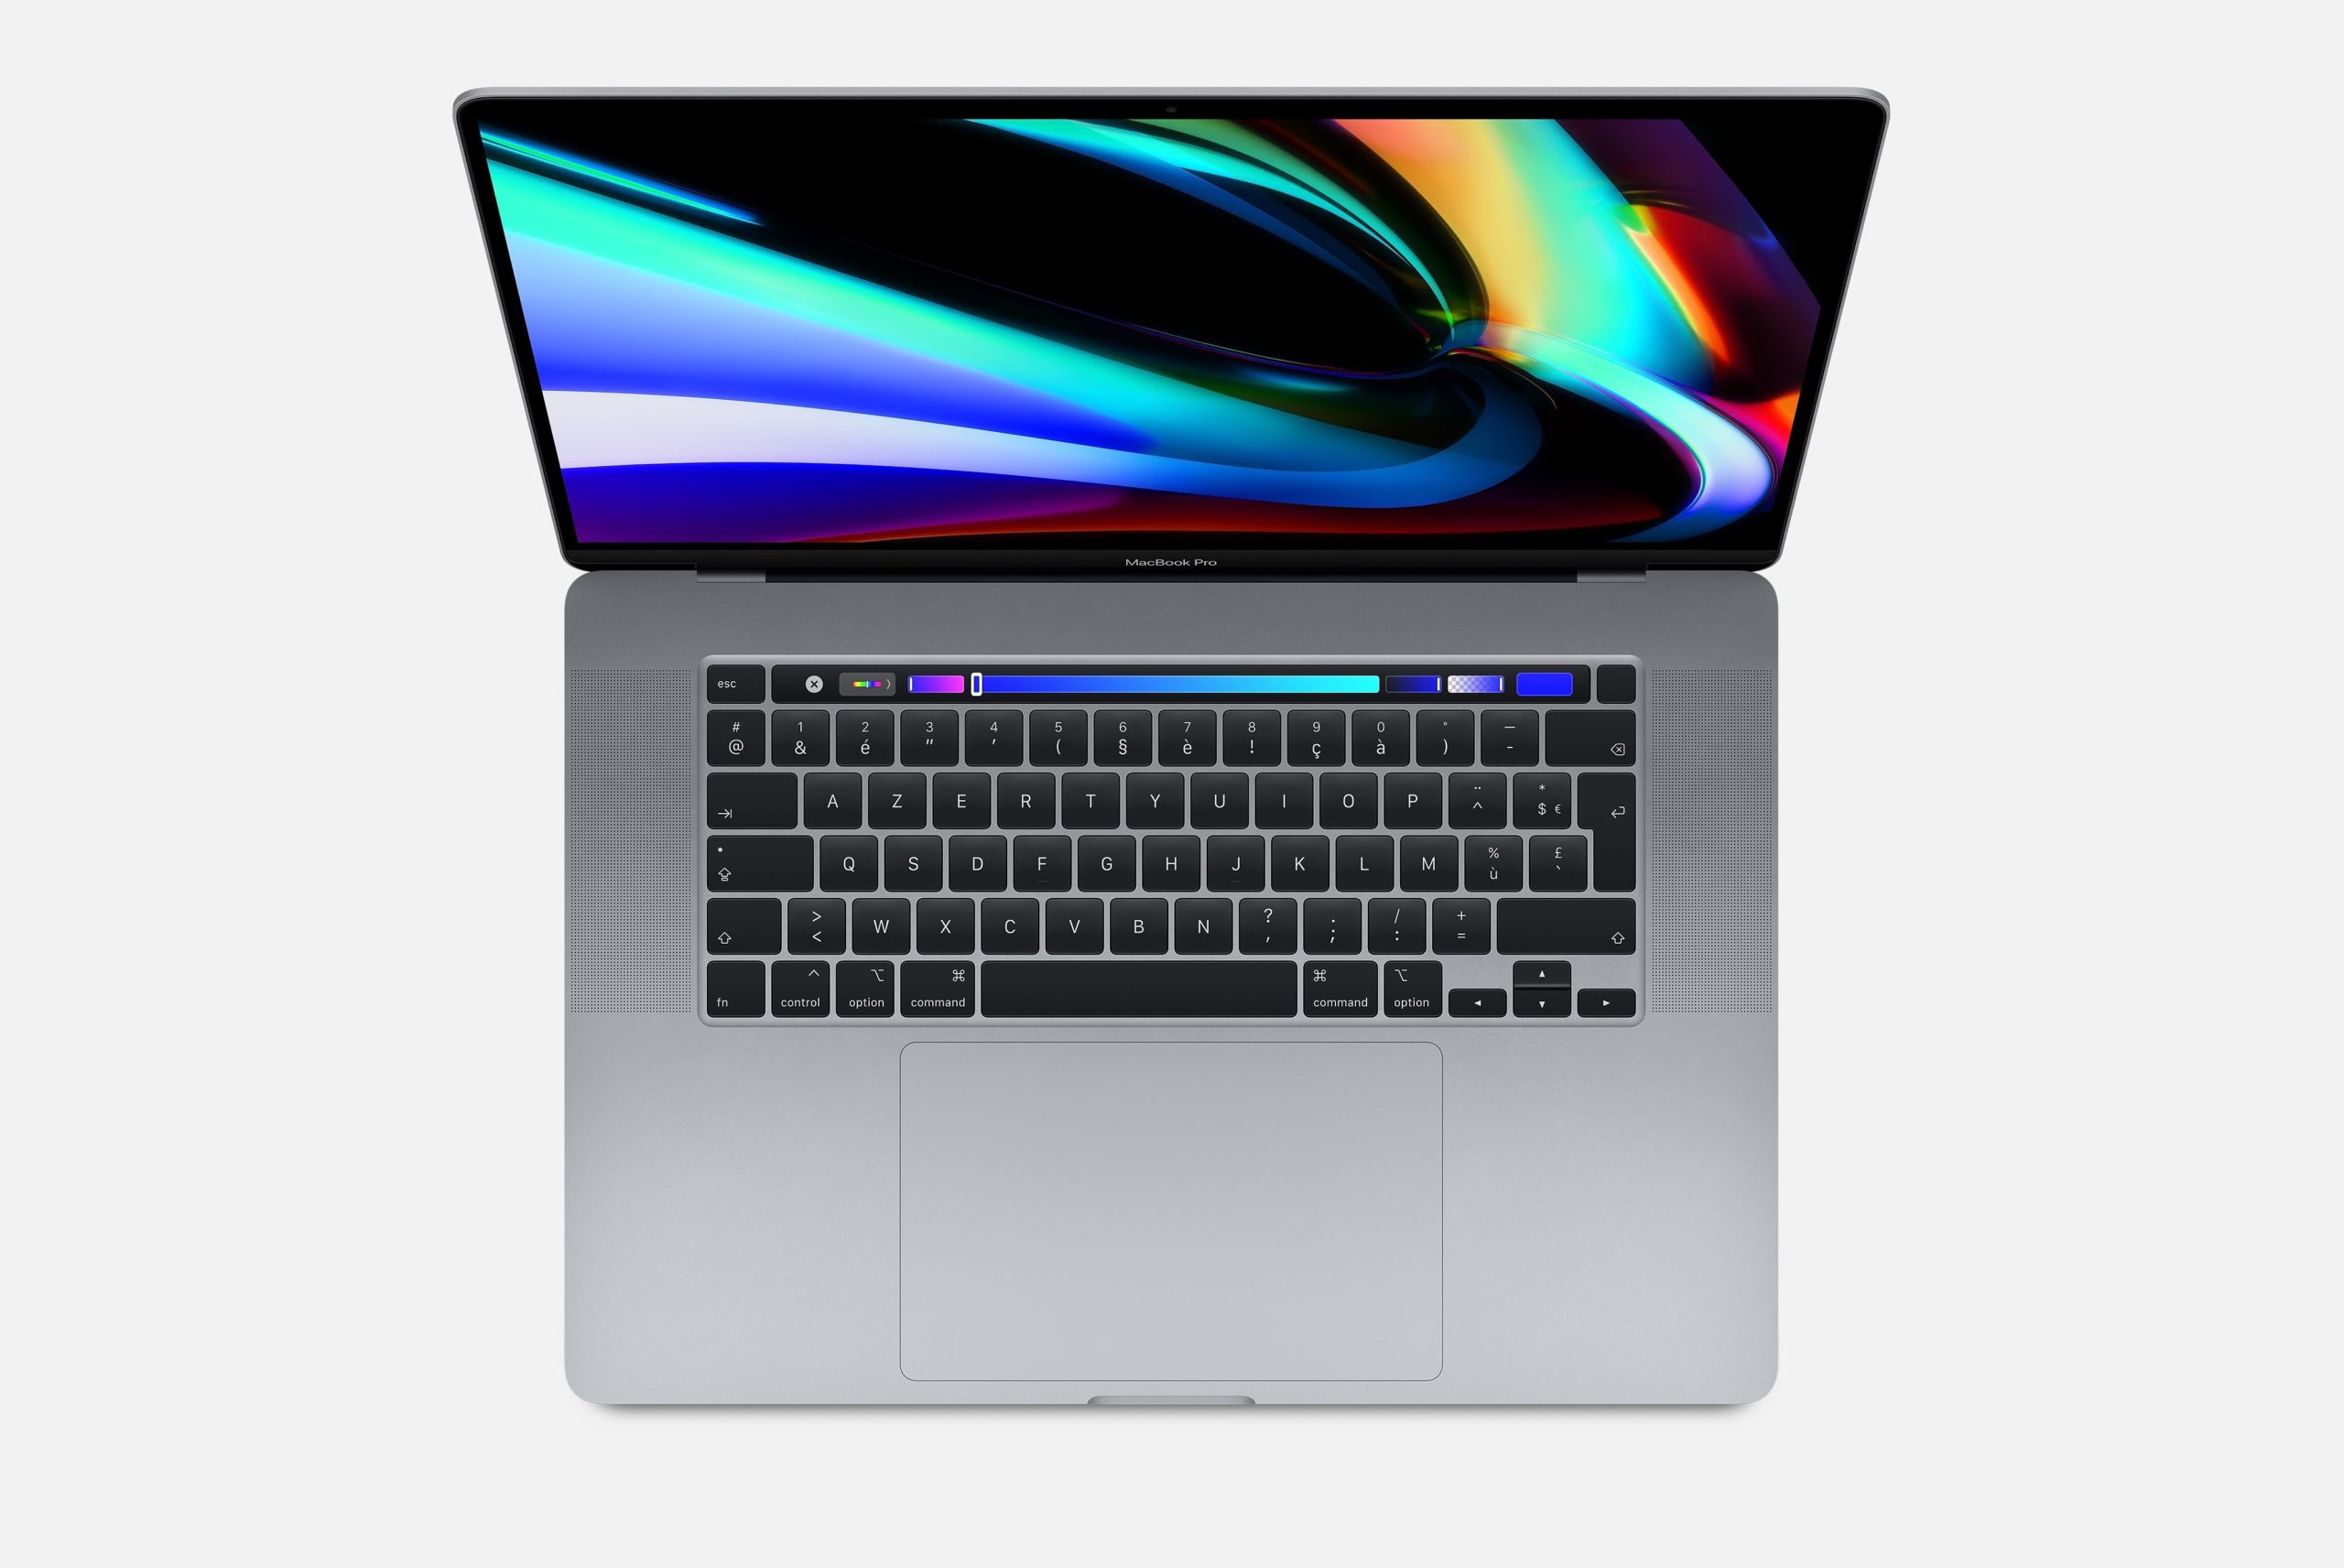 mbp16touch space gallery1 201911 GEO FR scaled